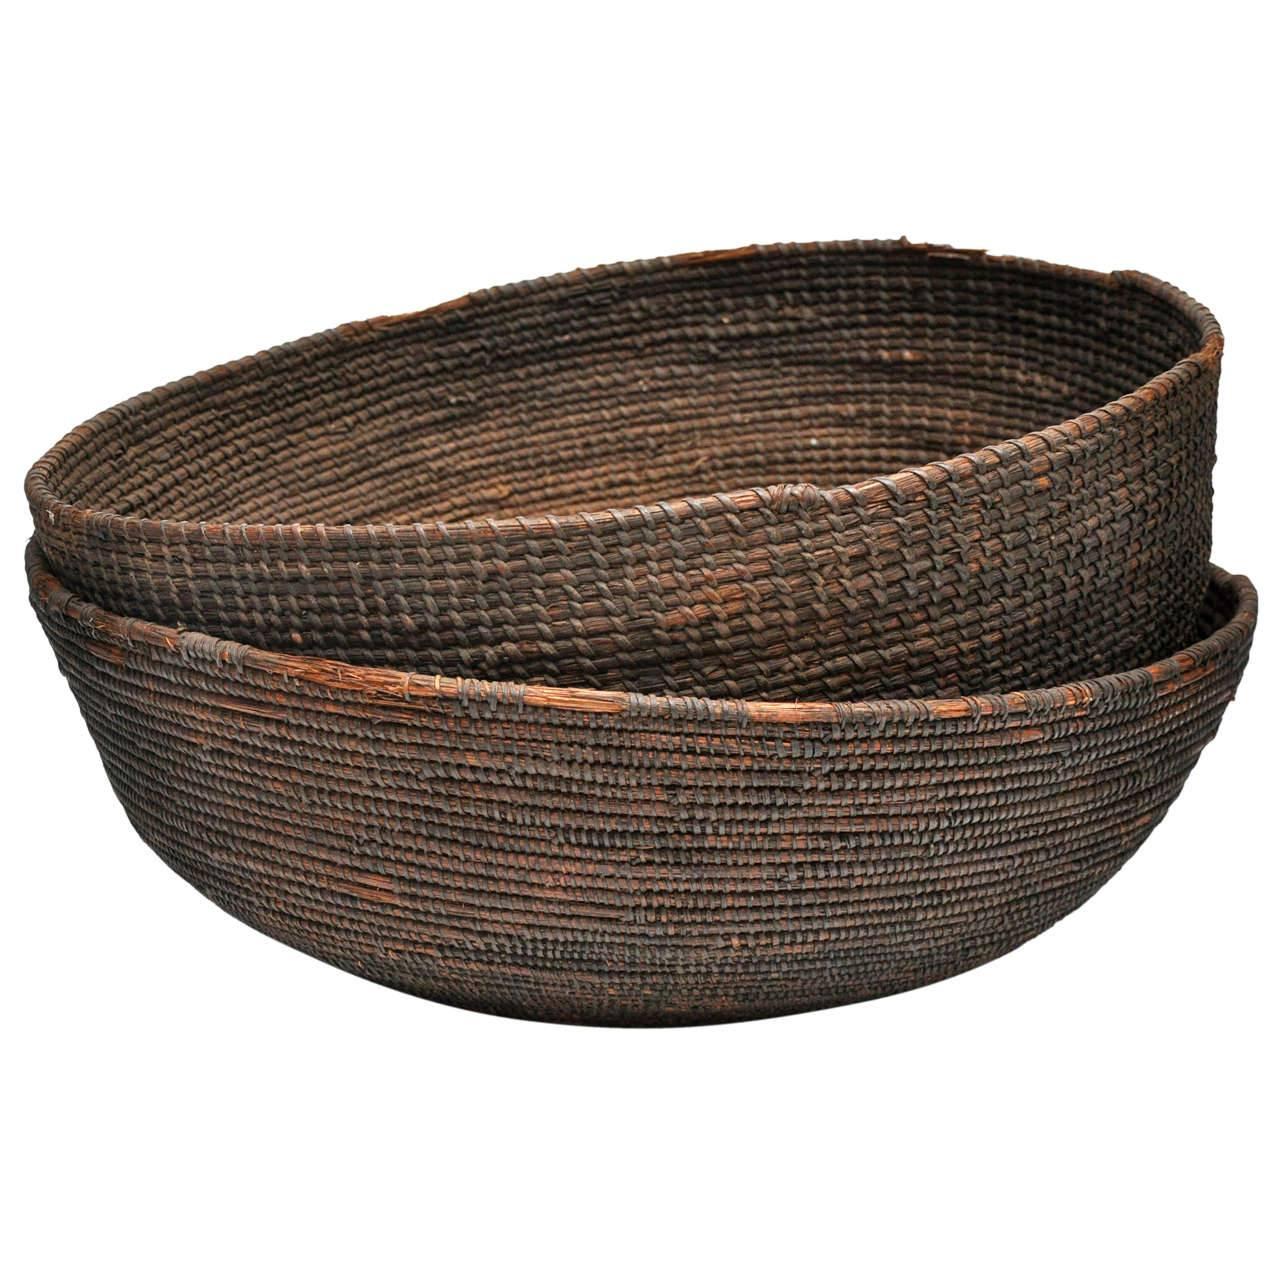 Early 20th Century Woven Nigerian Food Baskets